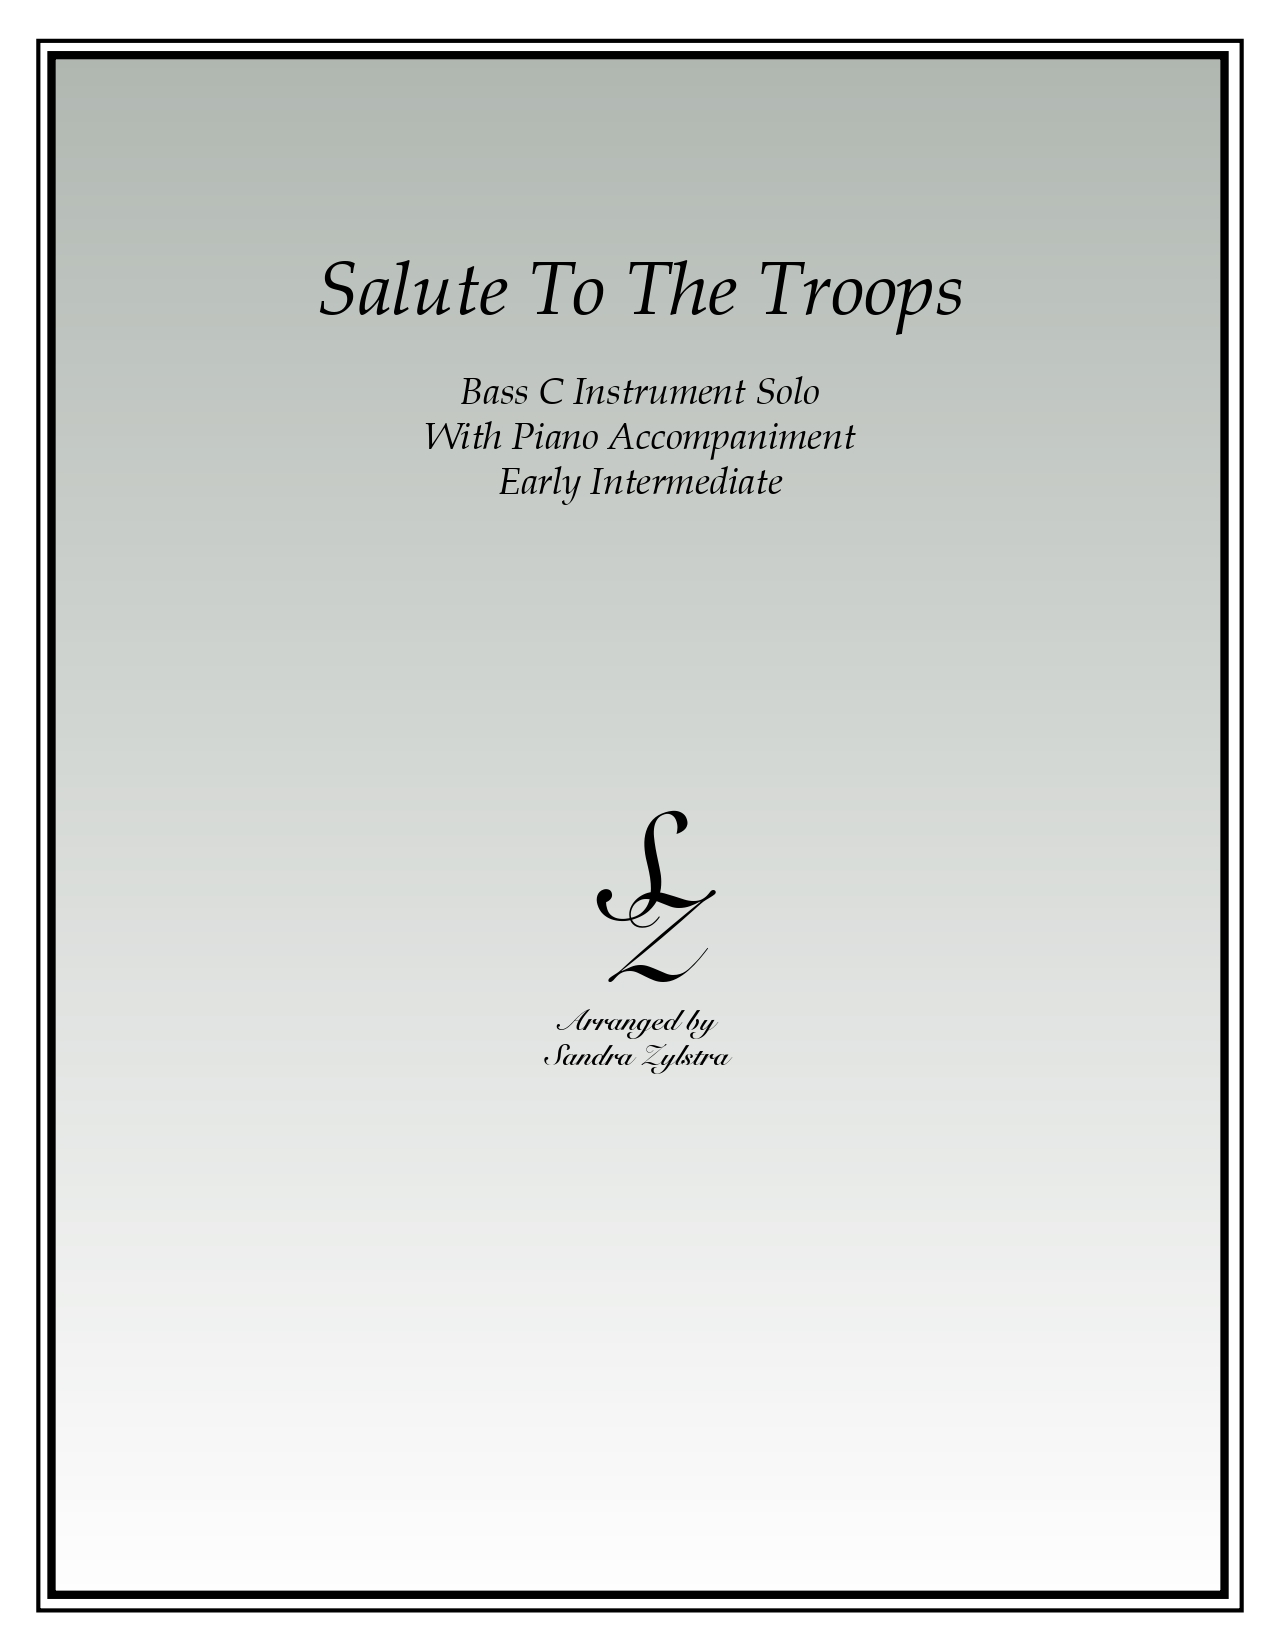 Salute To The Troops bass C instrument solo part cover page 00011